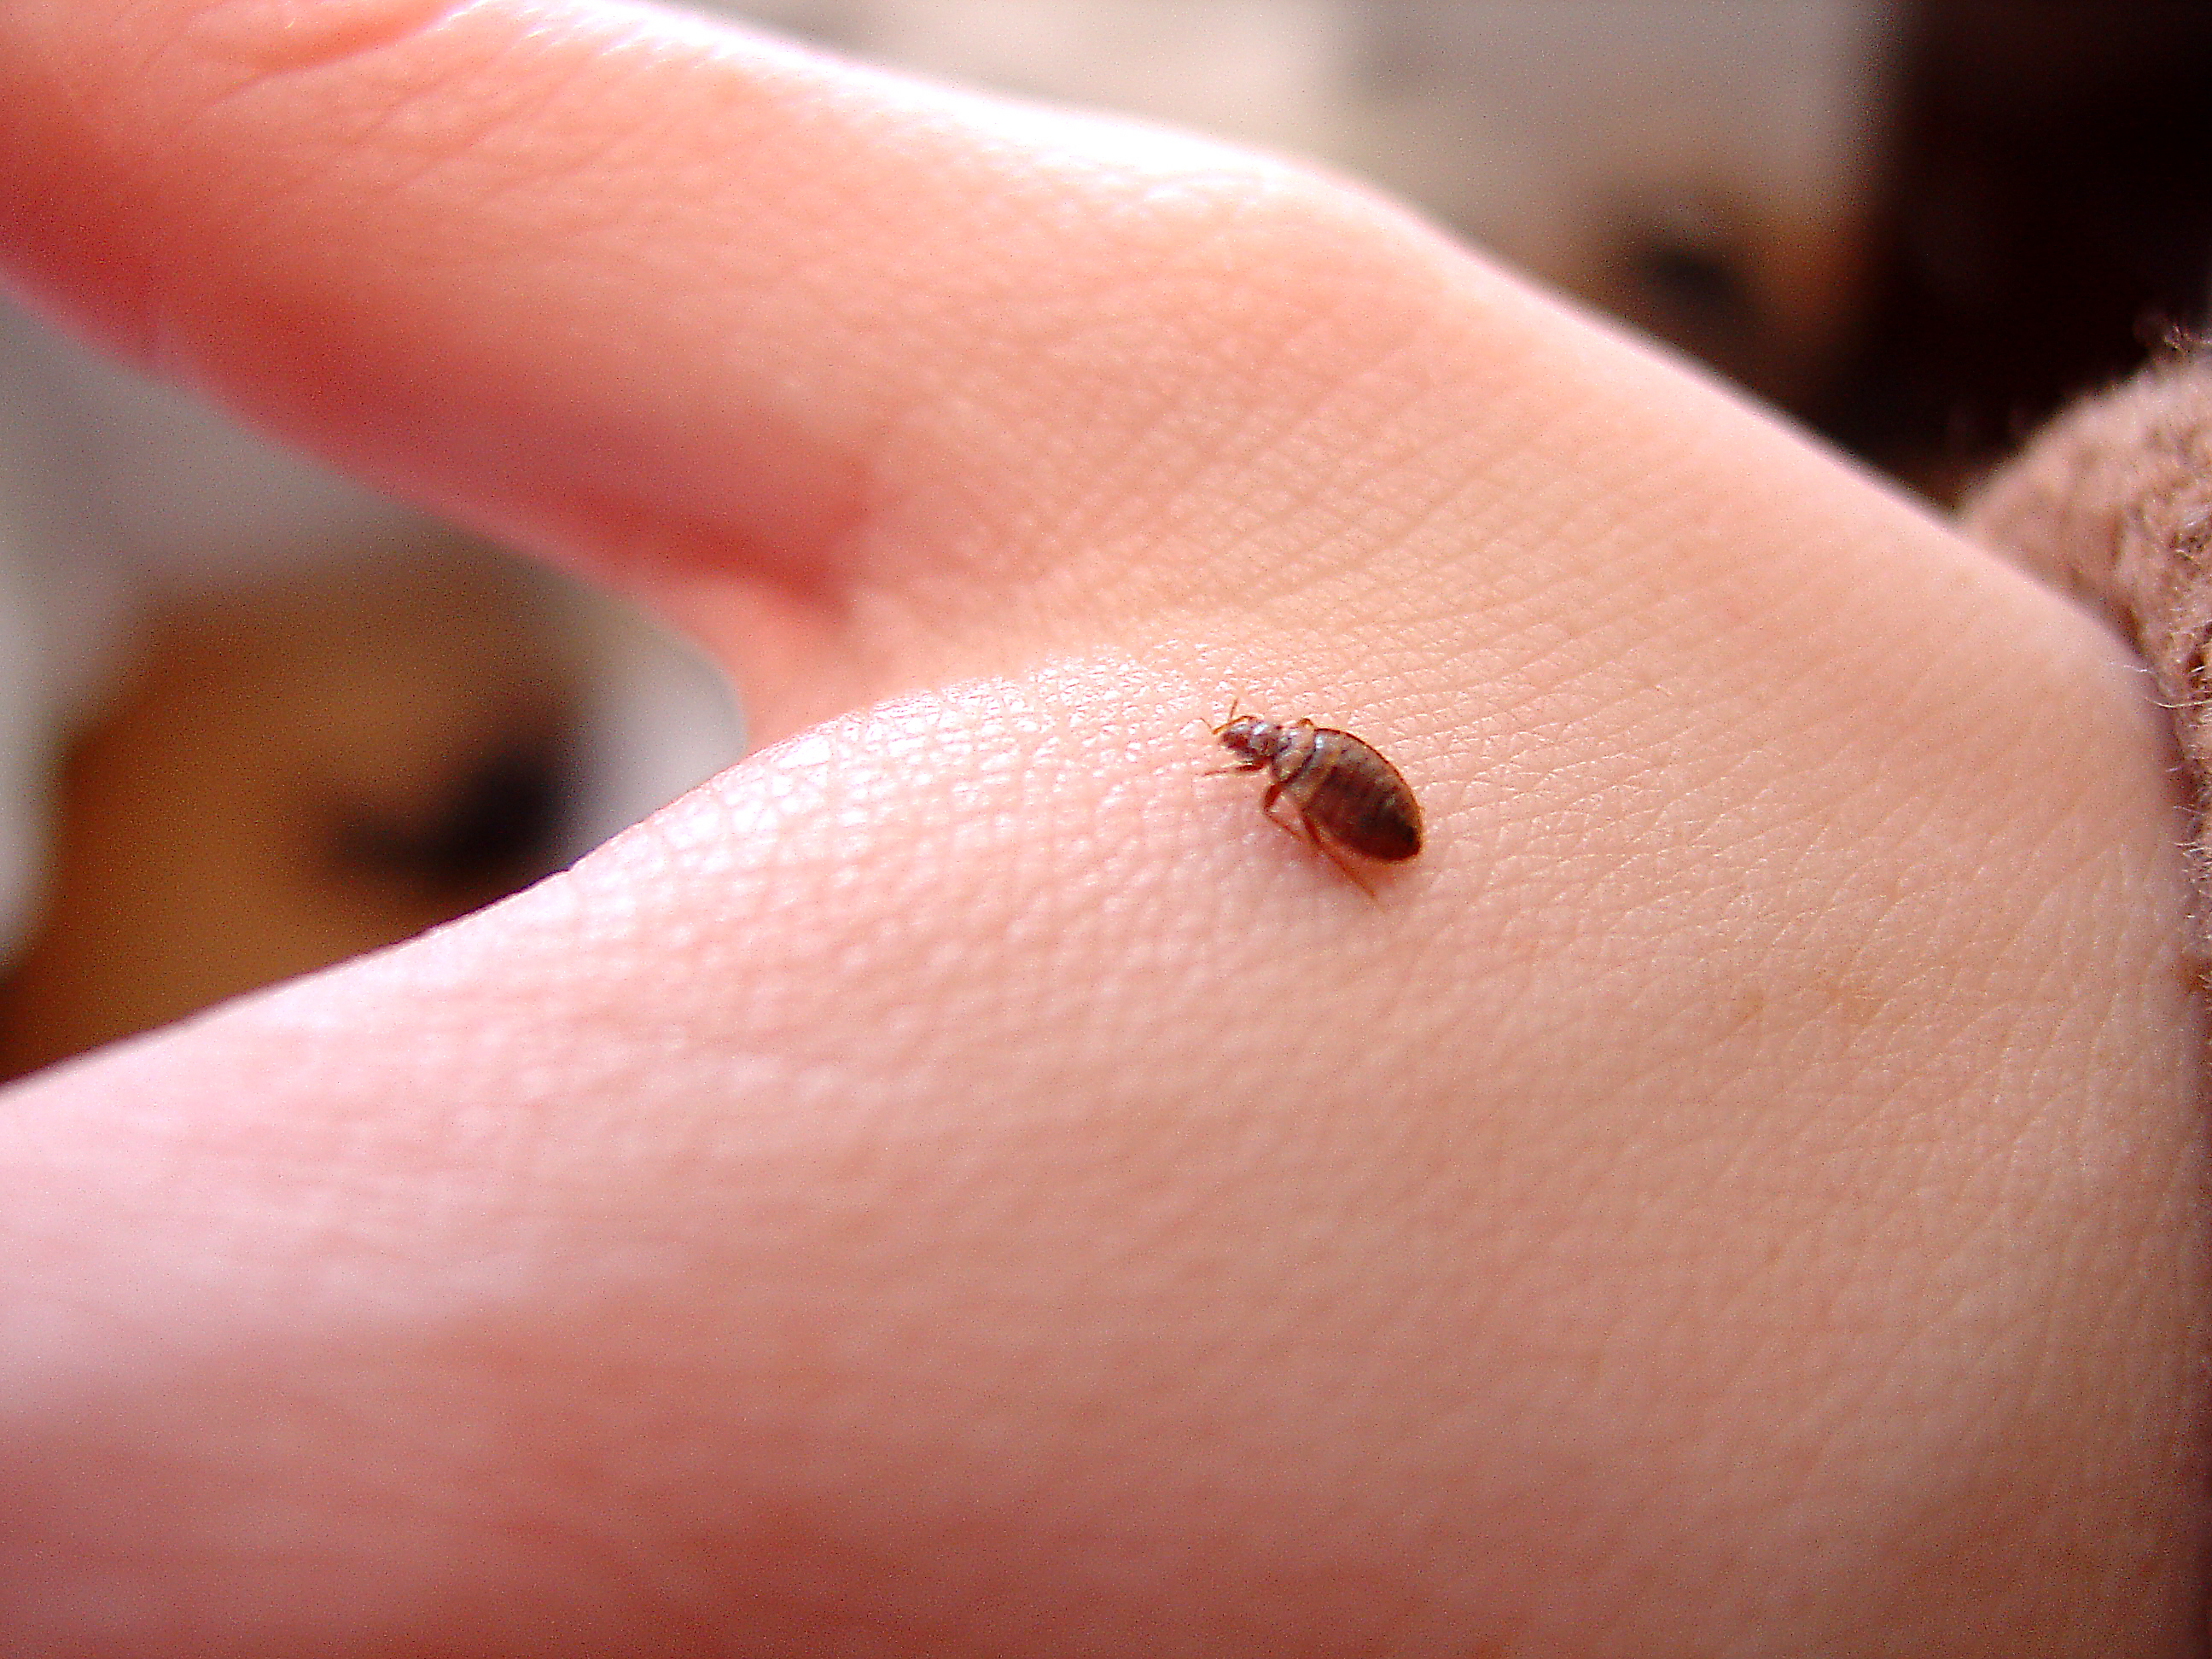 Signs of a Bed Bug Infestation | Bed Bug Signs